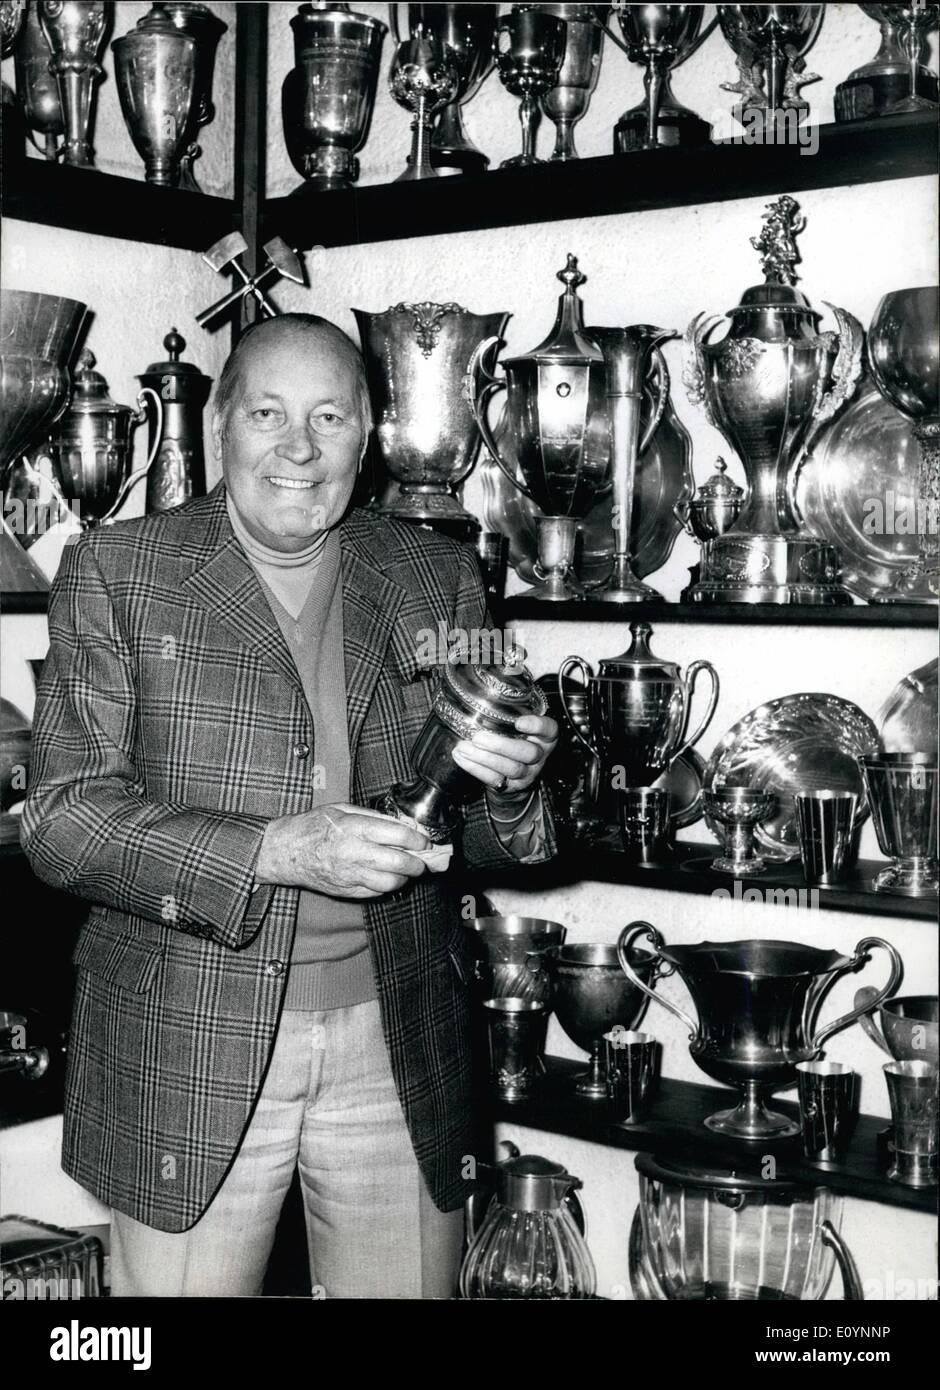 Dec. 18, 1970 - Racing-driver Hans Stuck 70 years old: In front of all his cups (photo) Hans Stuck remembers all his former successes. On December 27th he can celebrate his 70th anniversary in his home in Obergrainau (Germany) - in the best of health. Hans Stuck, born in Freiburg, became active at the age of 22. He won his first race. Four years later he won the European mountain competition - after that his career started. From 1932 he was driver at Daimler-Benz, two years later he went to Auto-Union to drive one of the very quick ''Silberpfeil''. 1934 he won his first Grand-Prix in Germany Stock Photo